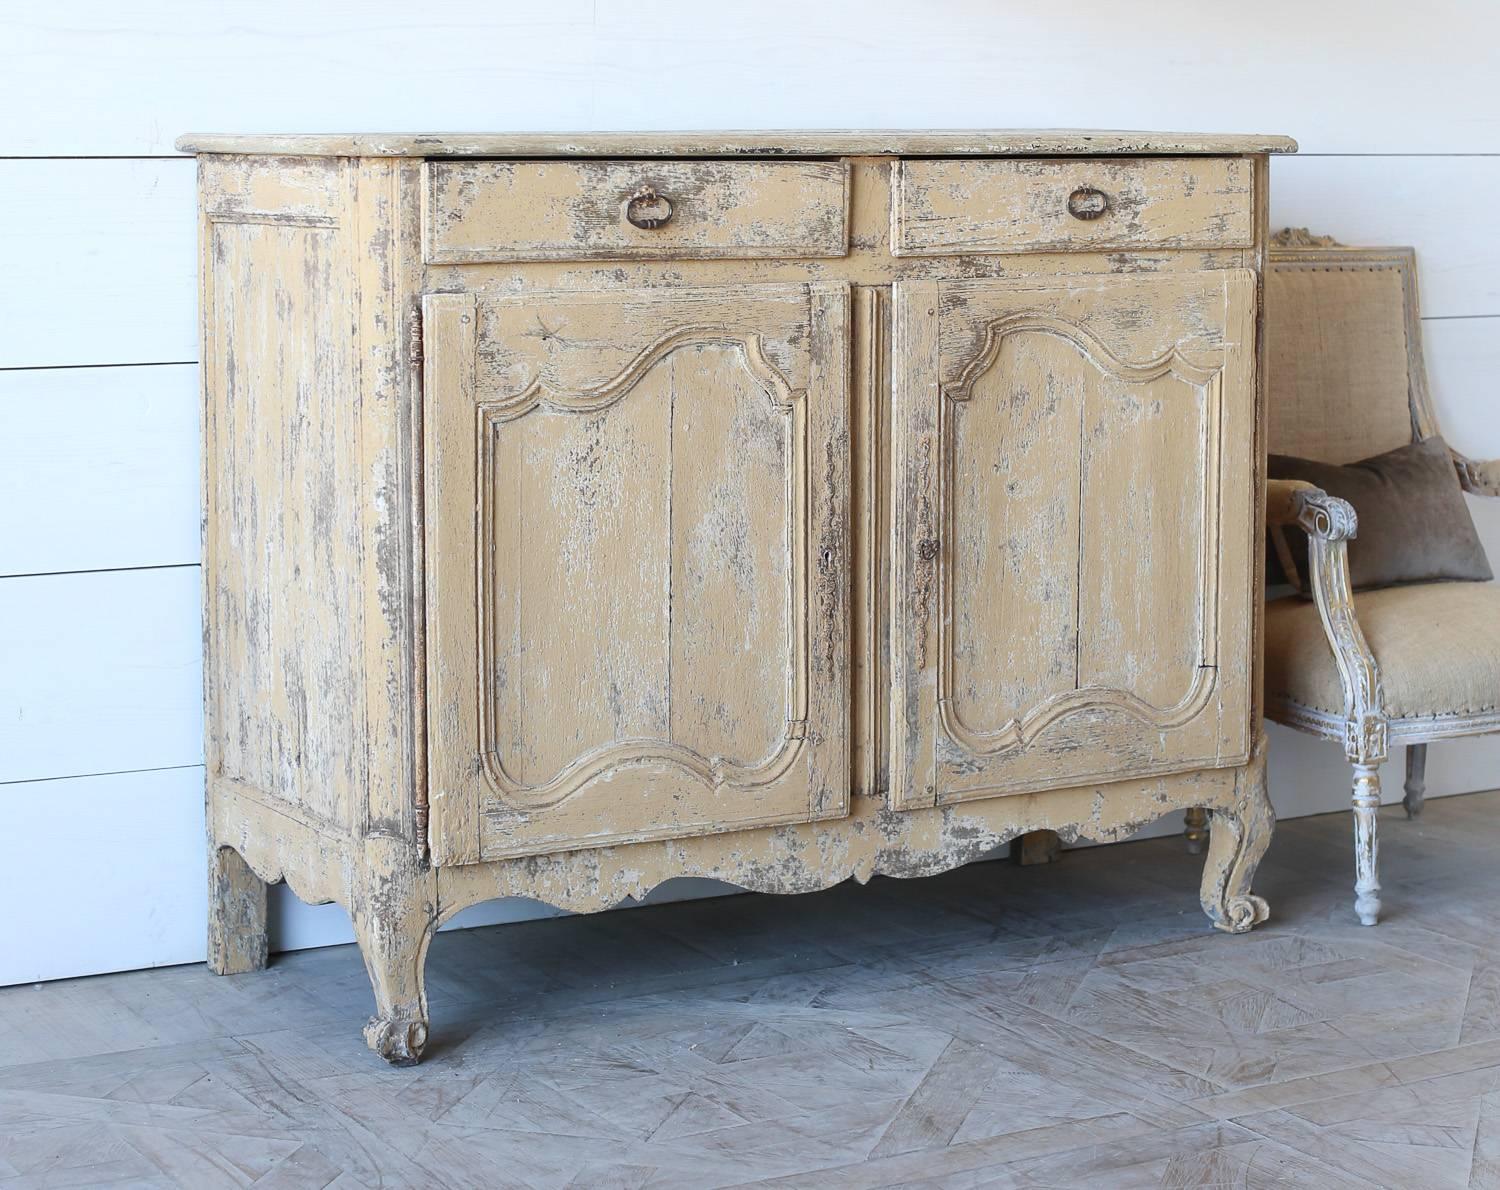 Grande in scale, this French Oak sideboard in a stunning worn apricot finish provides generous storage. The Classic shape and carvings offer a Provincial feel to any interior.